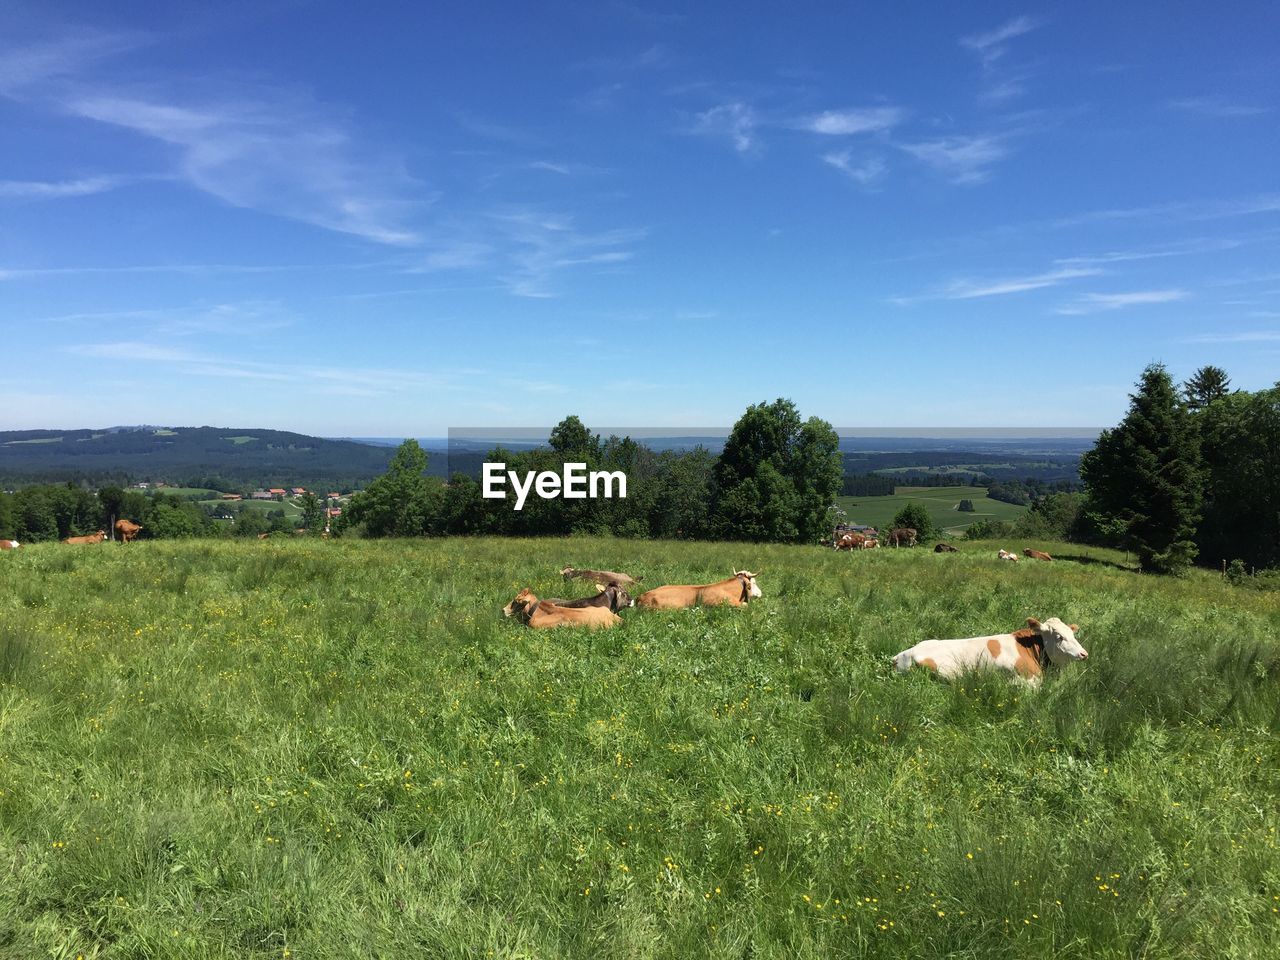 COWS ON FIELD BY TREE AGAINST SKY